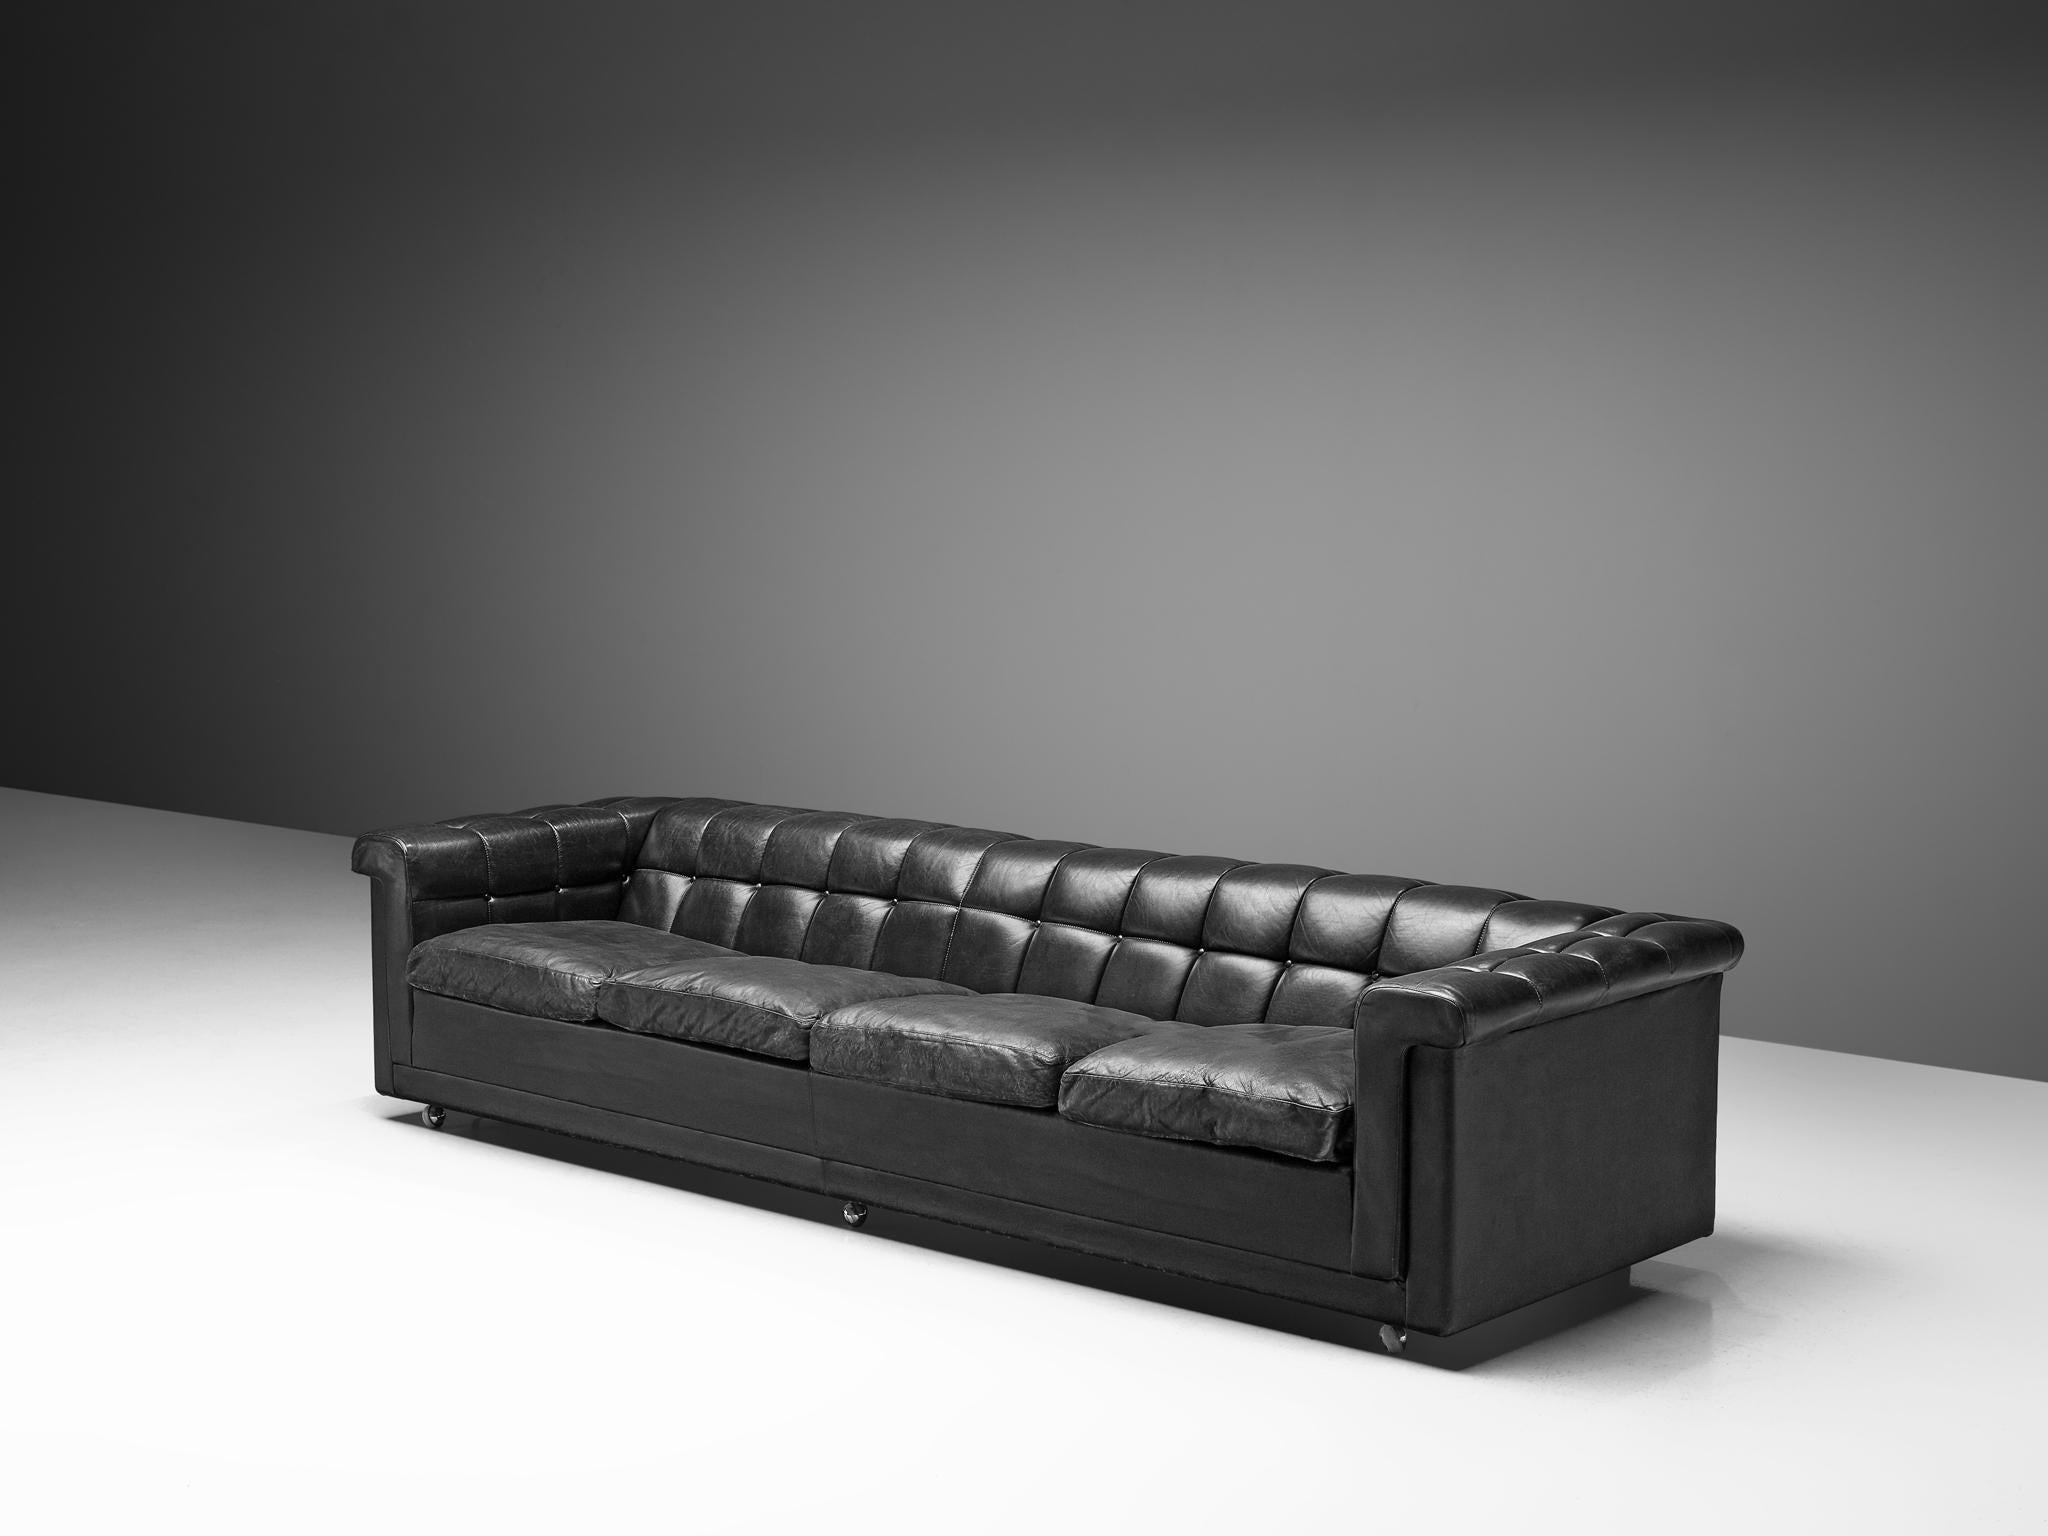 Robert Haussmann, four-seat sofa, in leather and metal, Switerland, 1970s.

This sofa in black leather has an interesting appearance of a Classic Chesterfield sofa with a modern aesthetic. The outside is tight and sleek. The black leather